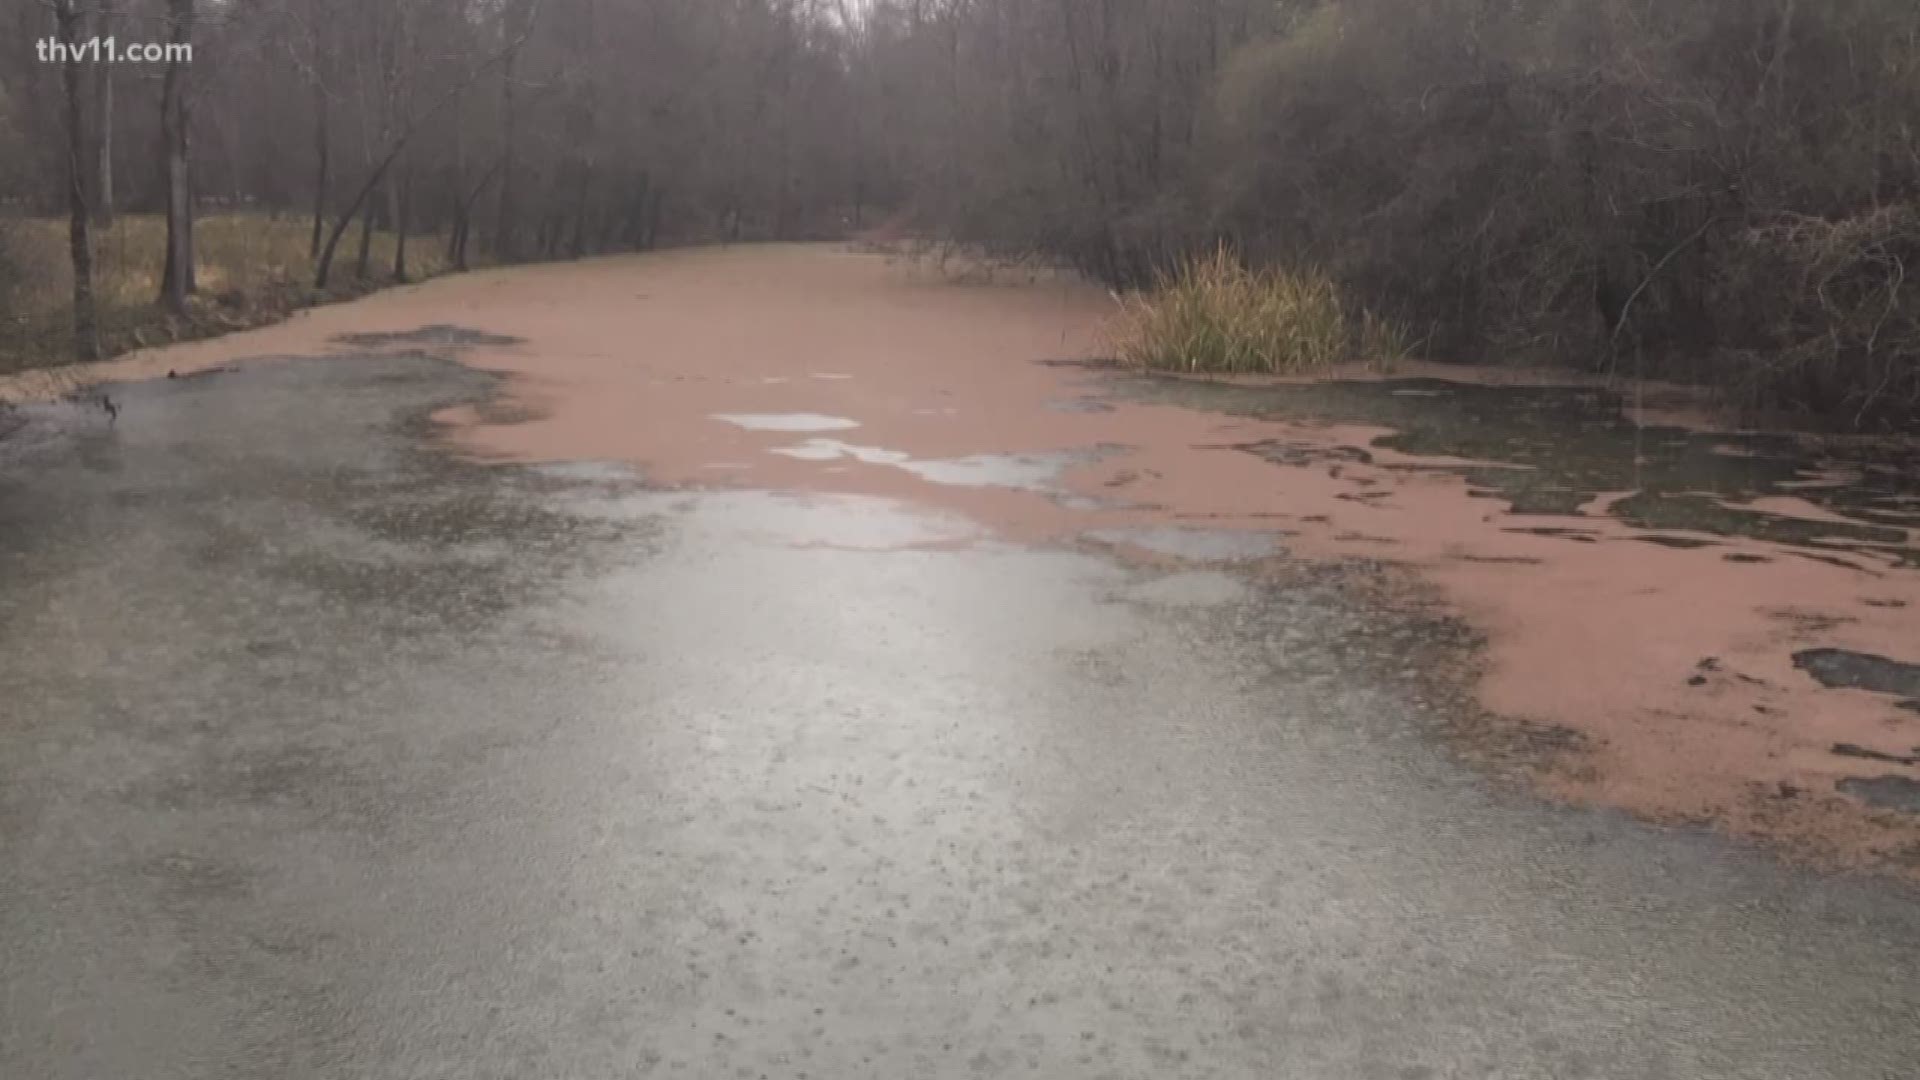 It's not every day that you see red in the Arkansas River, but one viewer said she did, prompting questions and concerns.